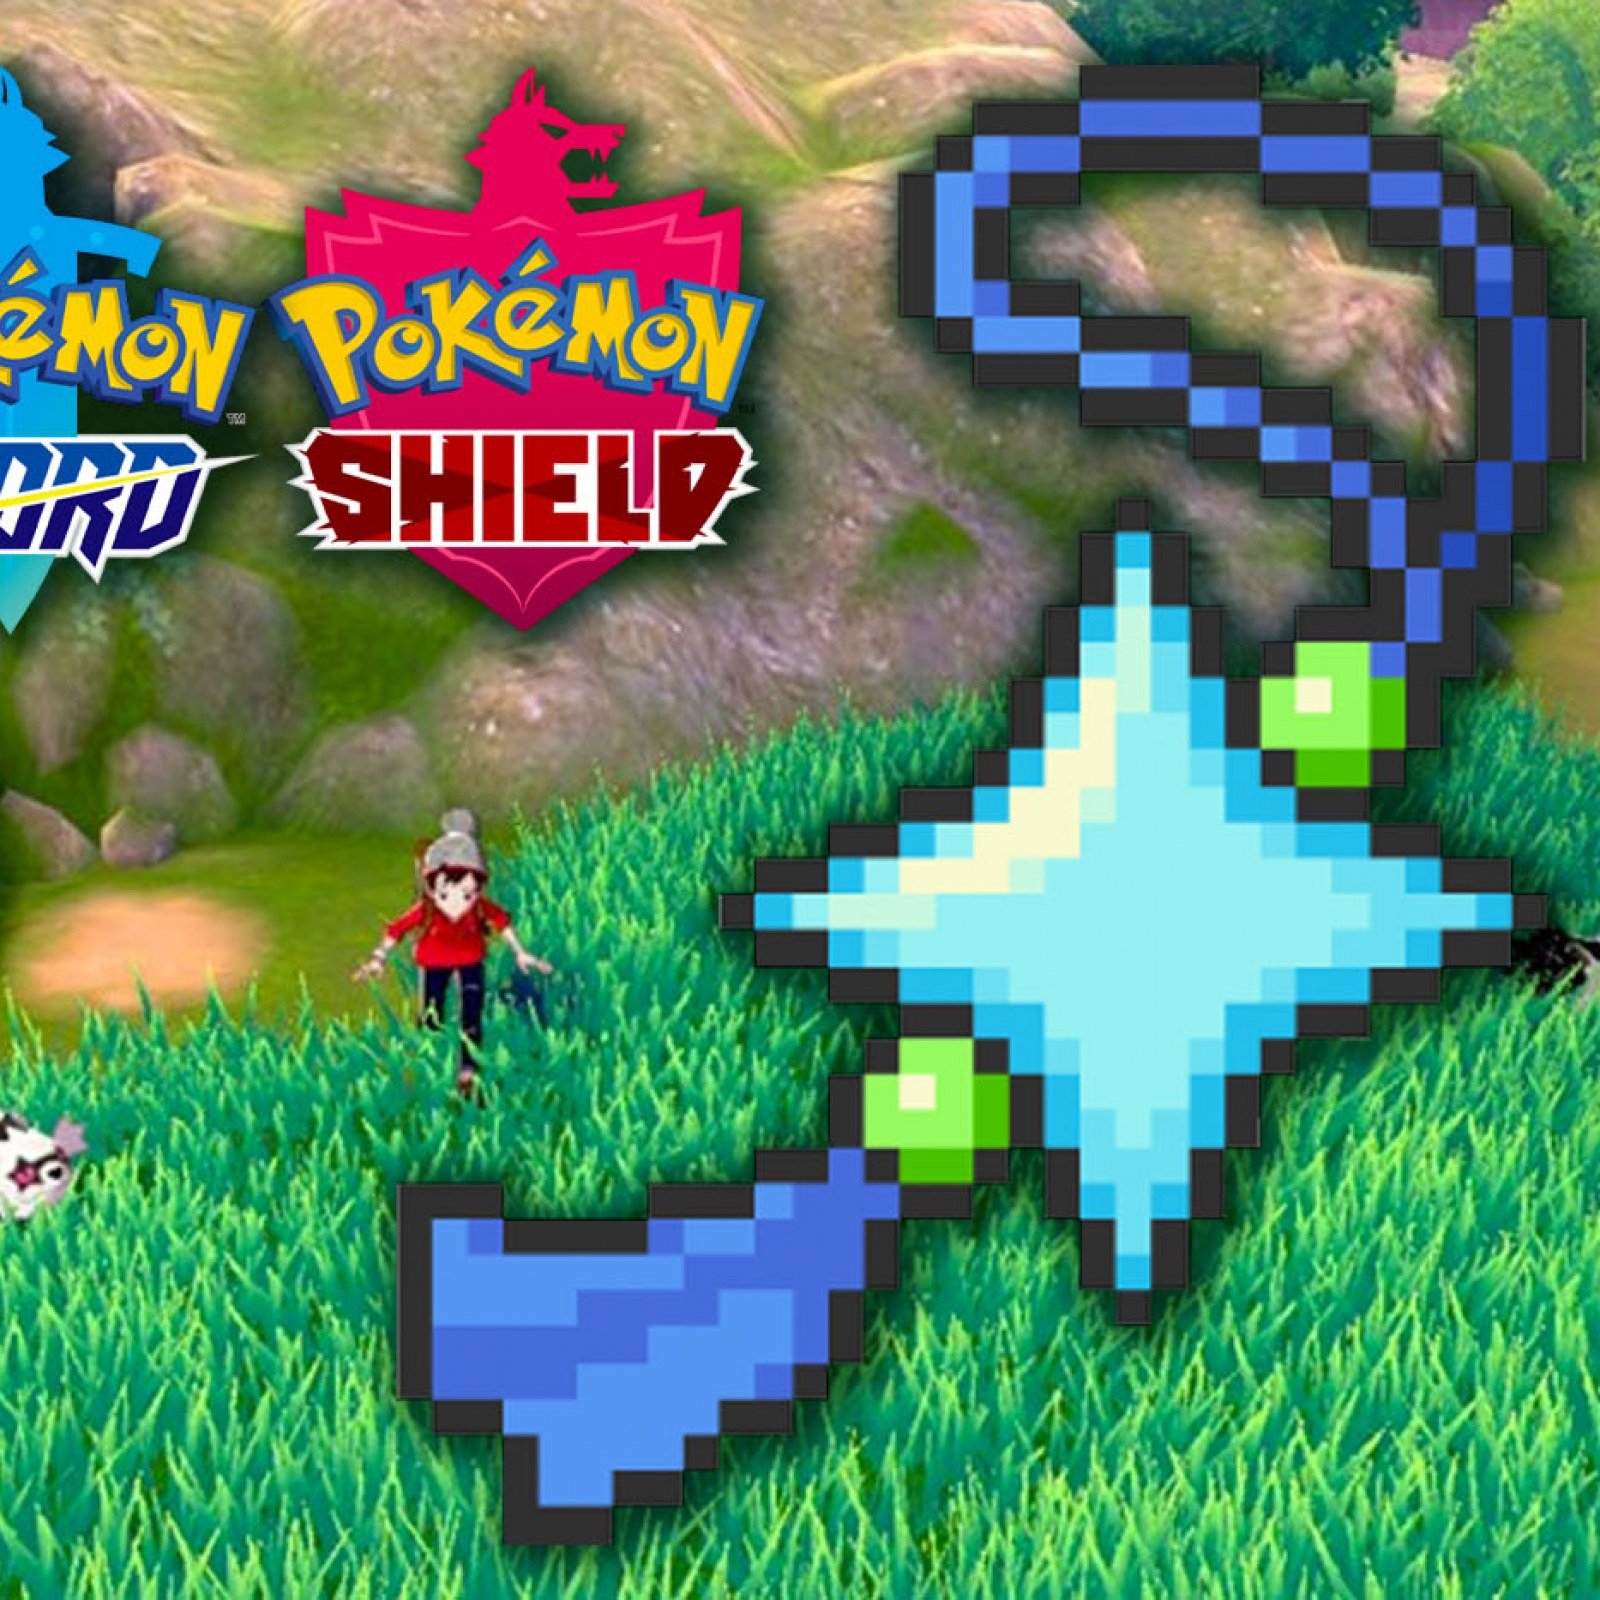 Pokémon Sword And Shield Shiny Hunting Guide How To Find